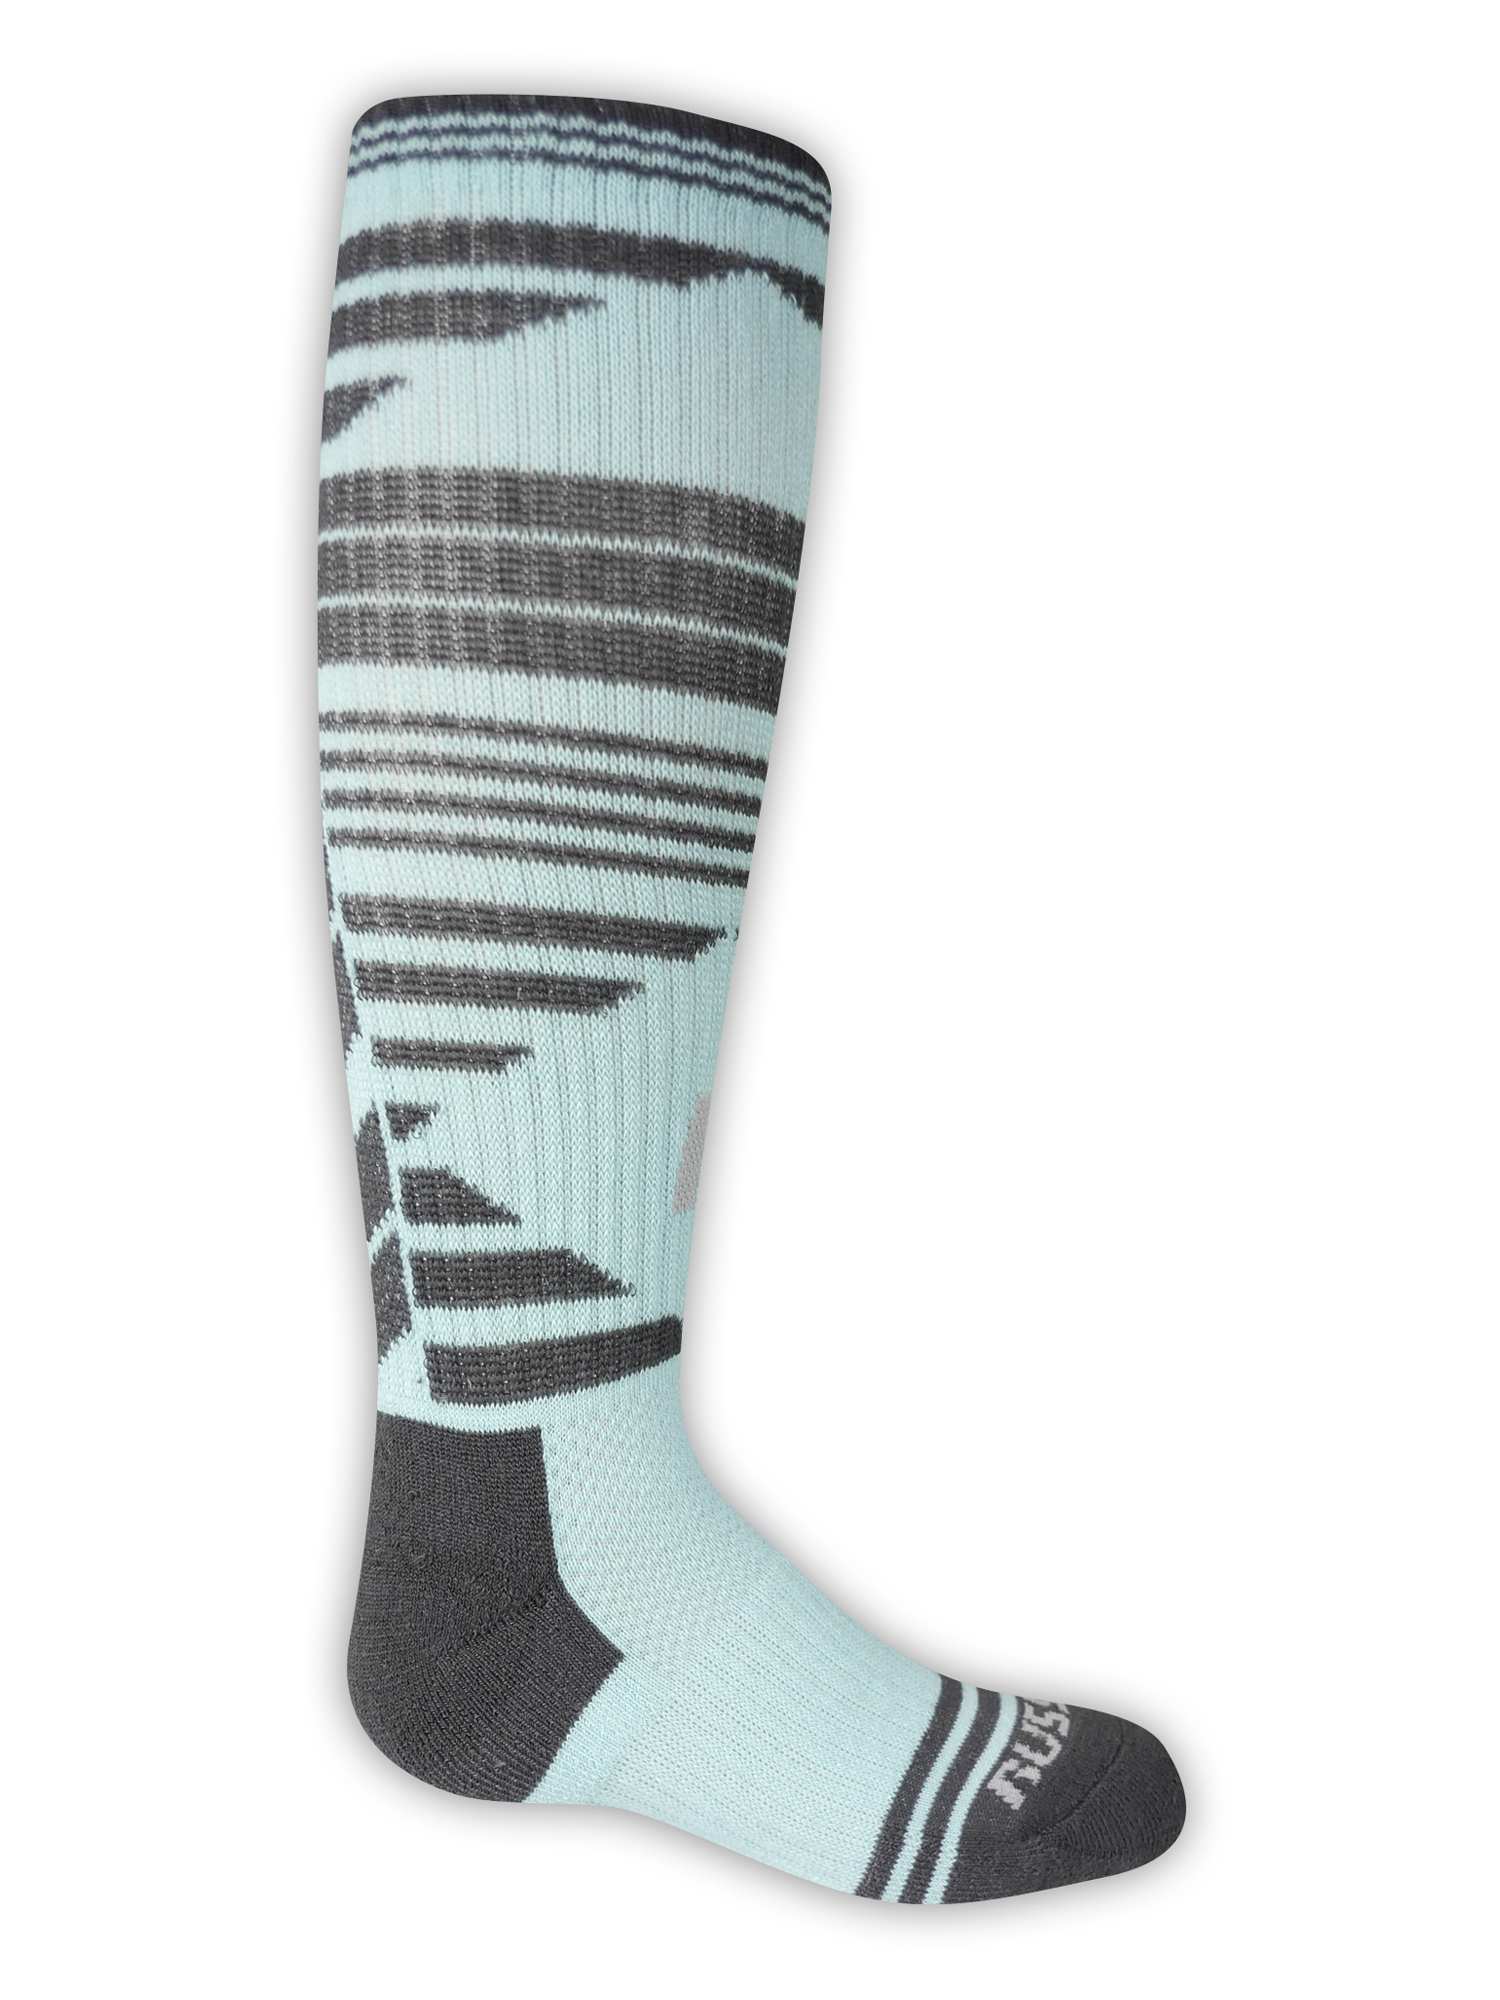 Russell Boys Striped Crew Socks, 3 Pack - image 3 of 4